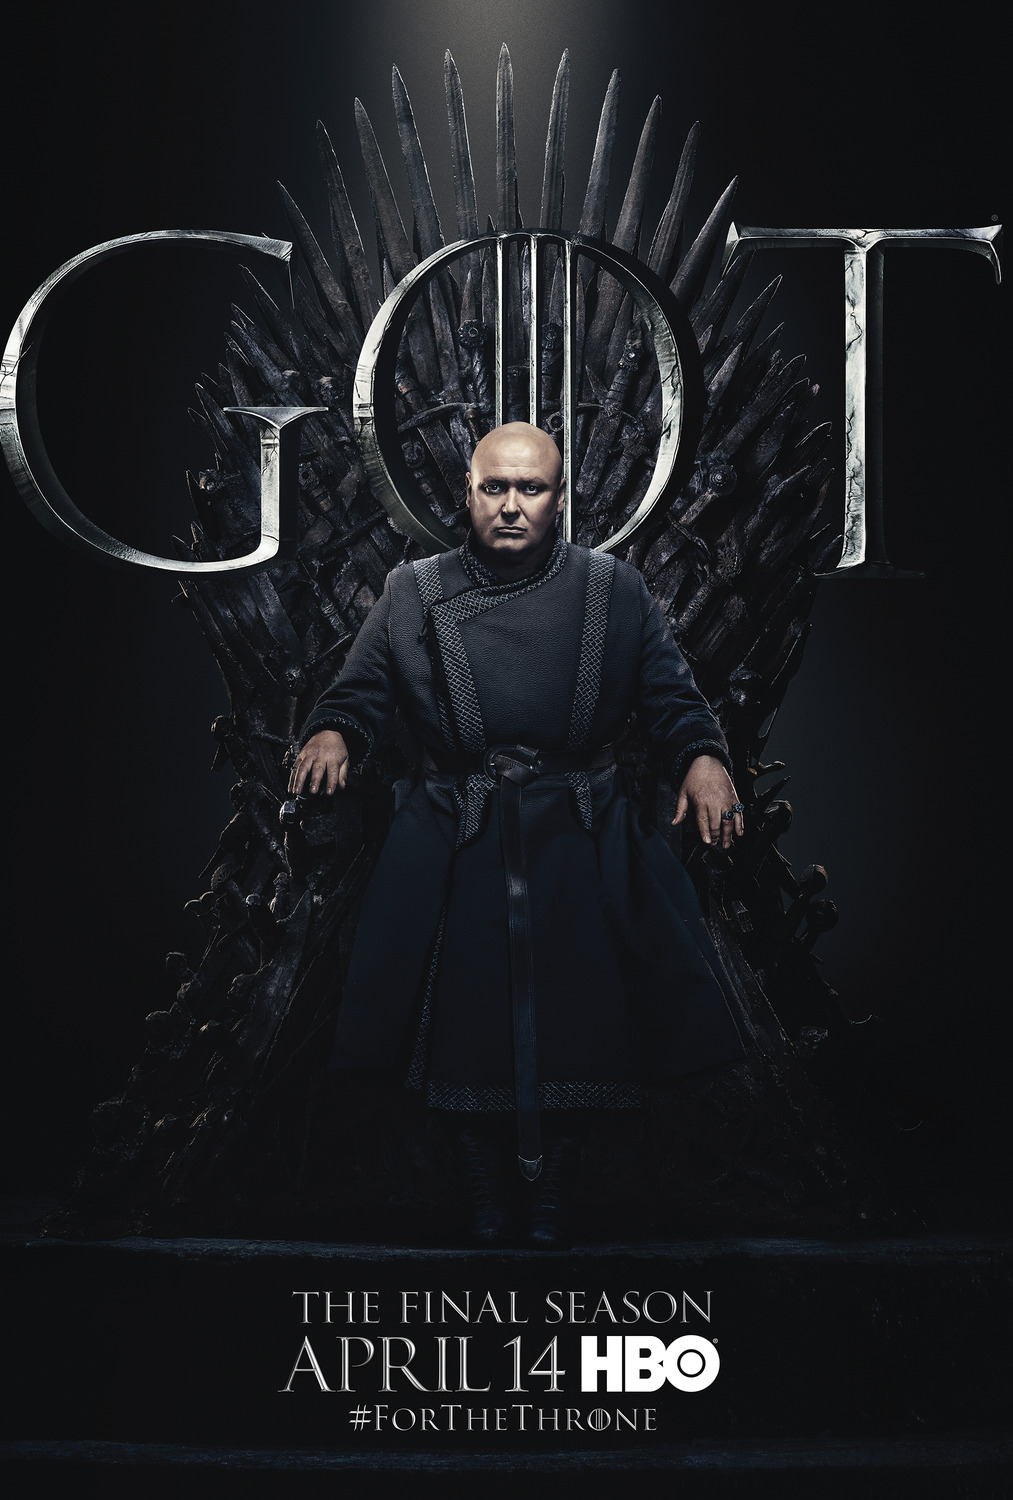 Extra Large Movie Poster Image for Game of Thrones (#123 of 125)